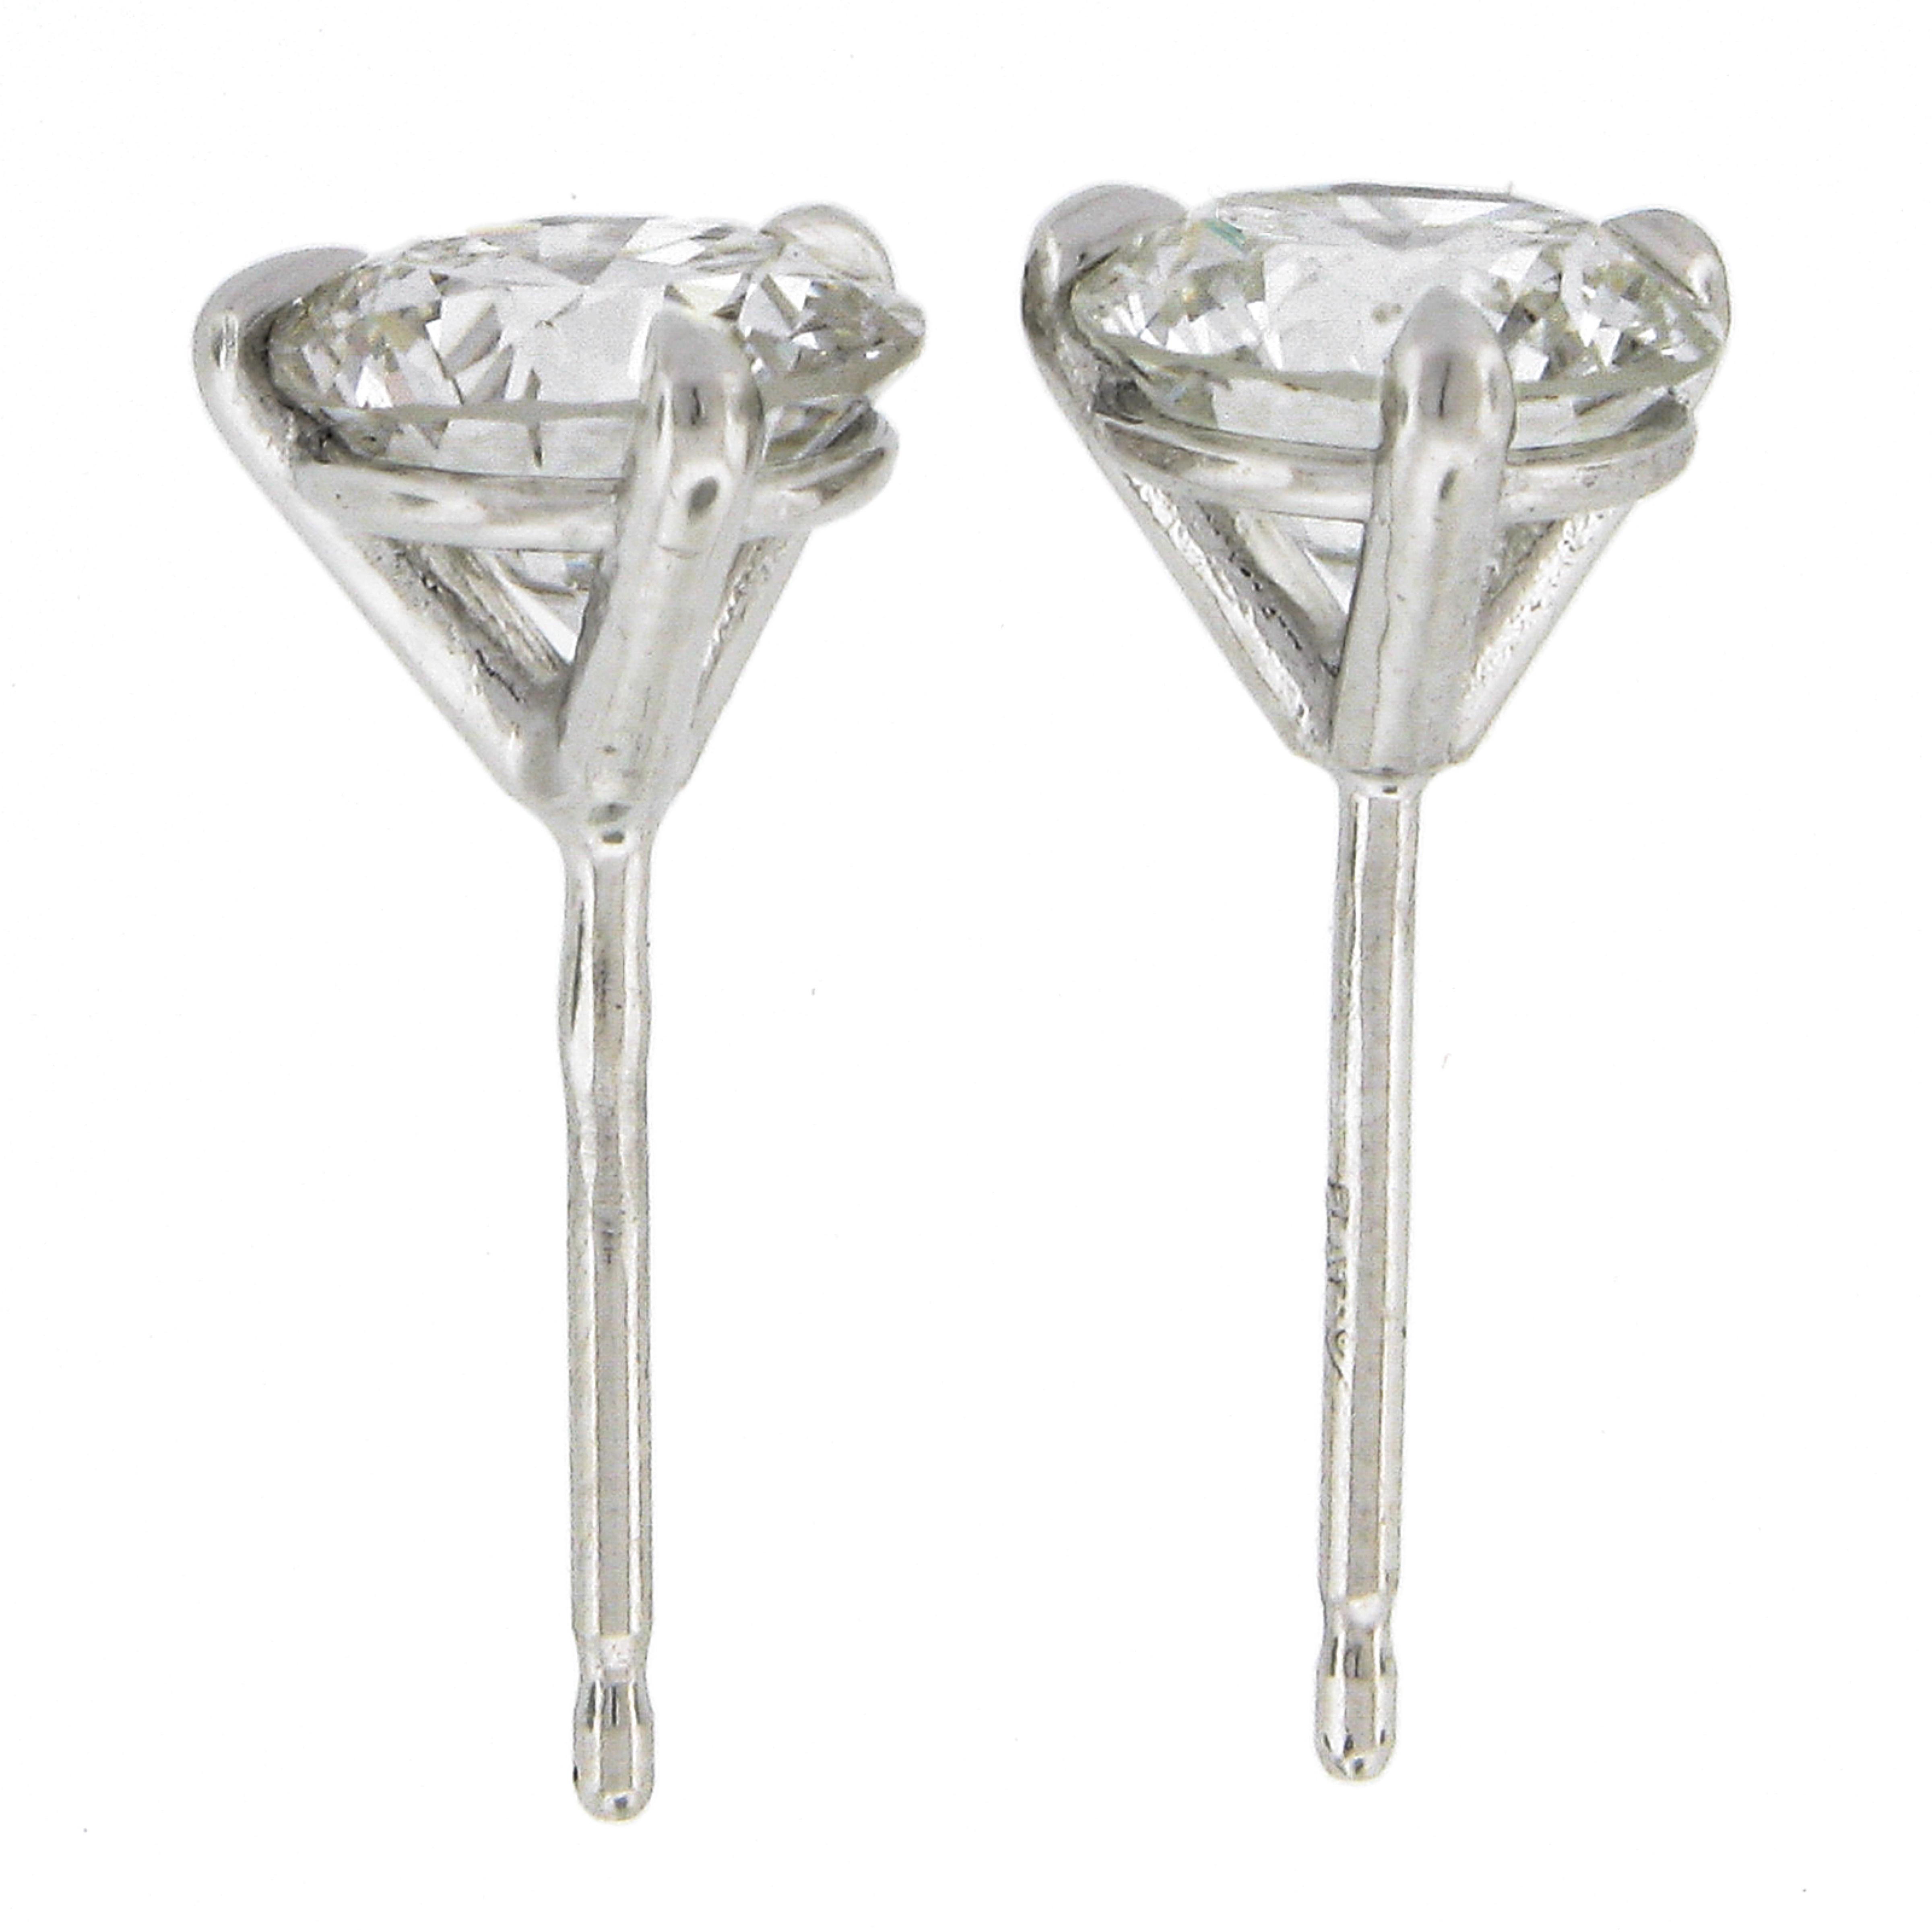 New Platinum 1.52ctw 3 Prong Martini GIA Round Brilliant Diamond Stud Earrings In New Condition For Sale In Montclair, NJ